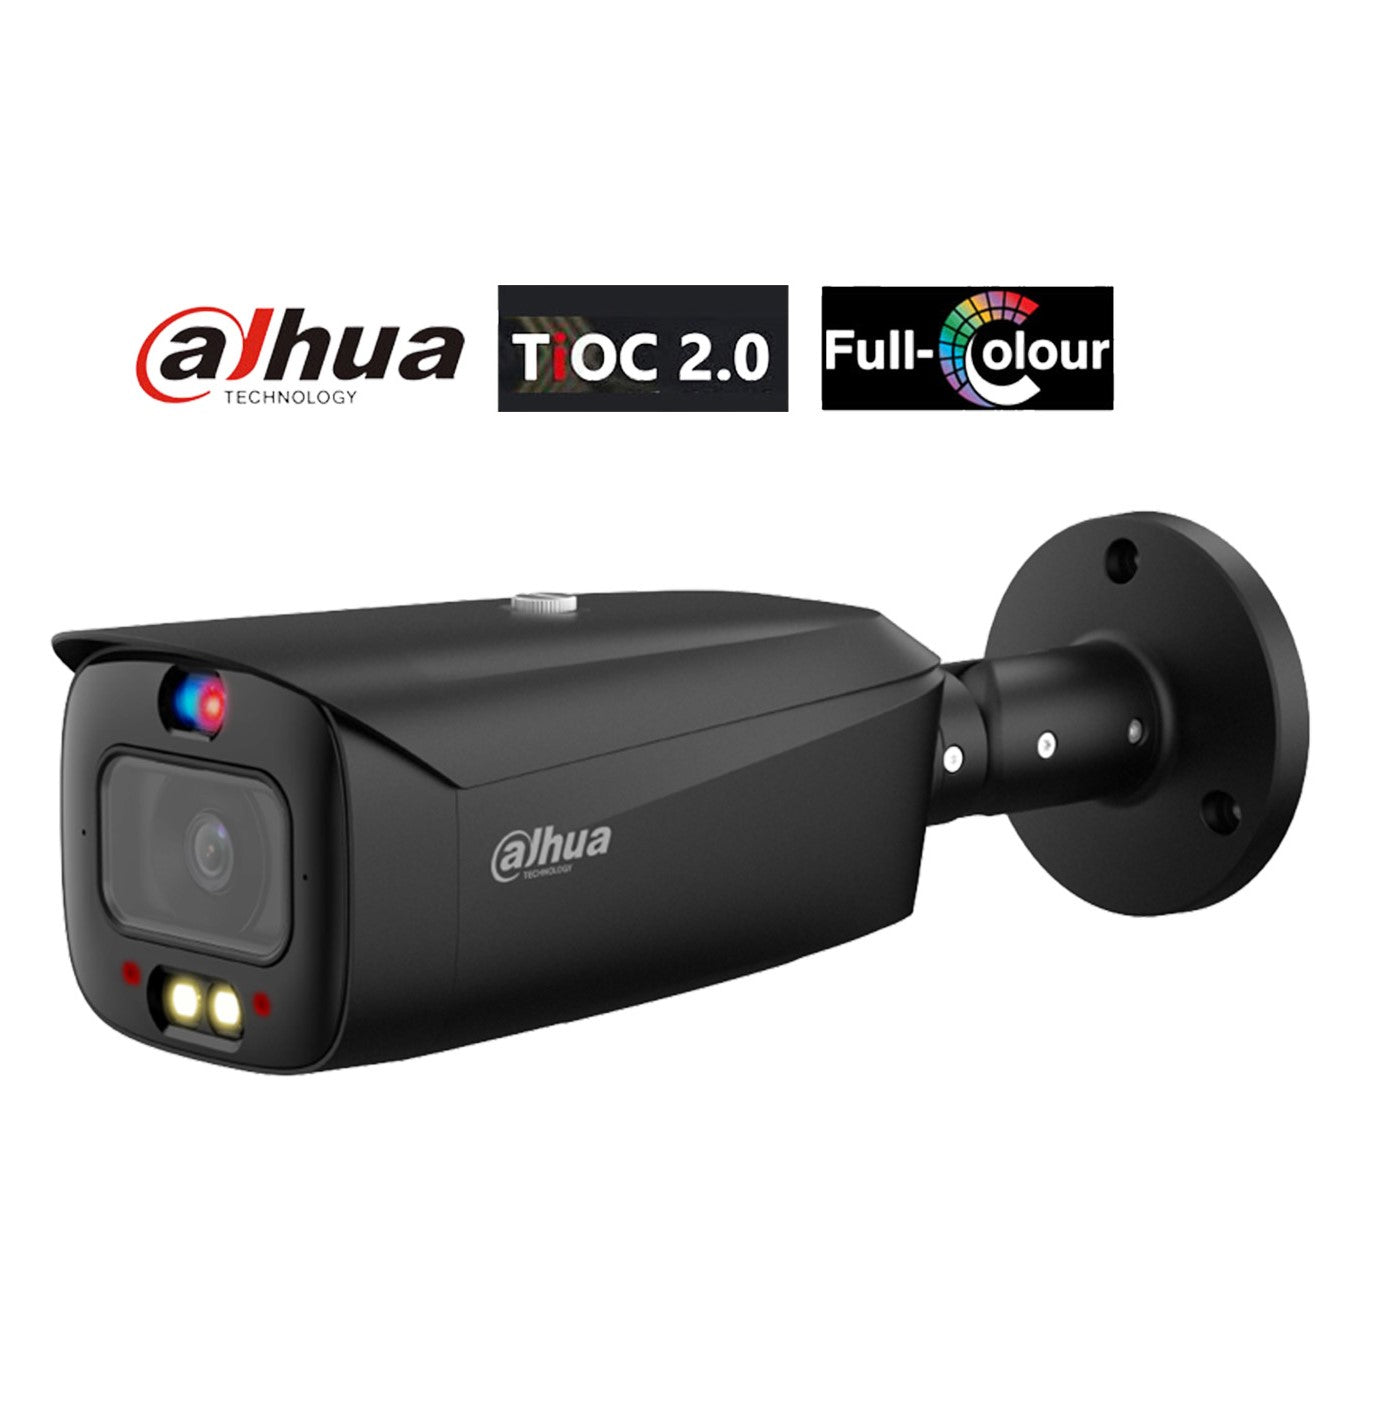 "Meet the Dahua DH-IPC-HFW3649T1-AS-PV-ANZ Bullet Camera: Your Ultimate Security Solution"